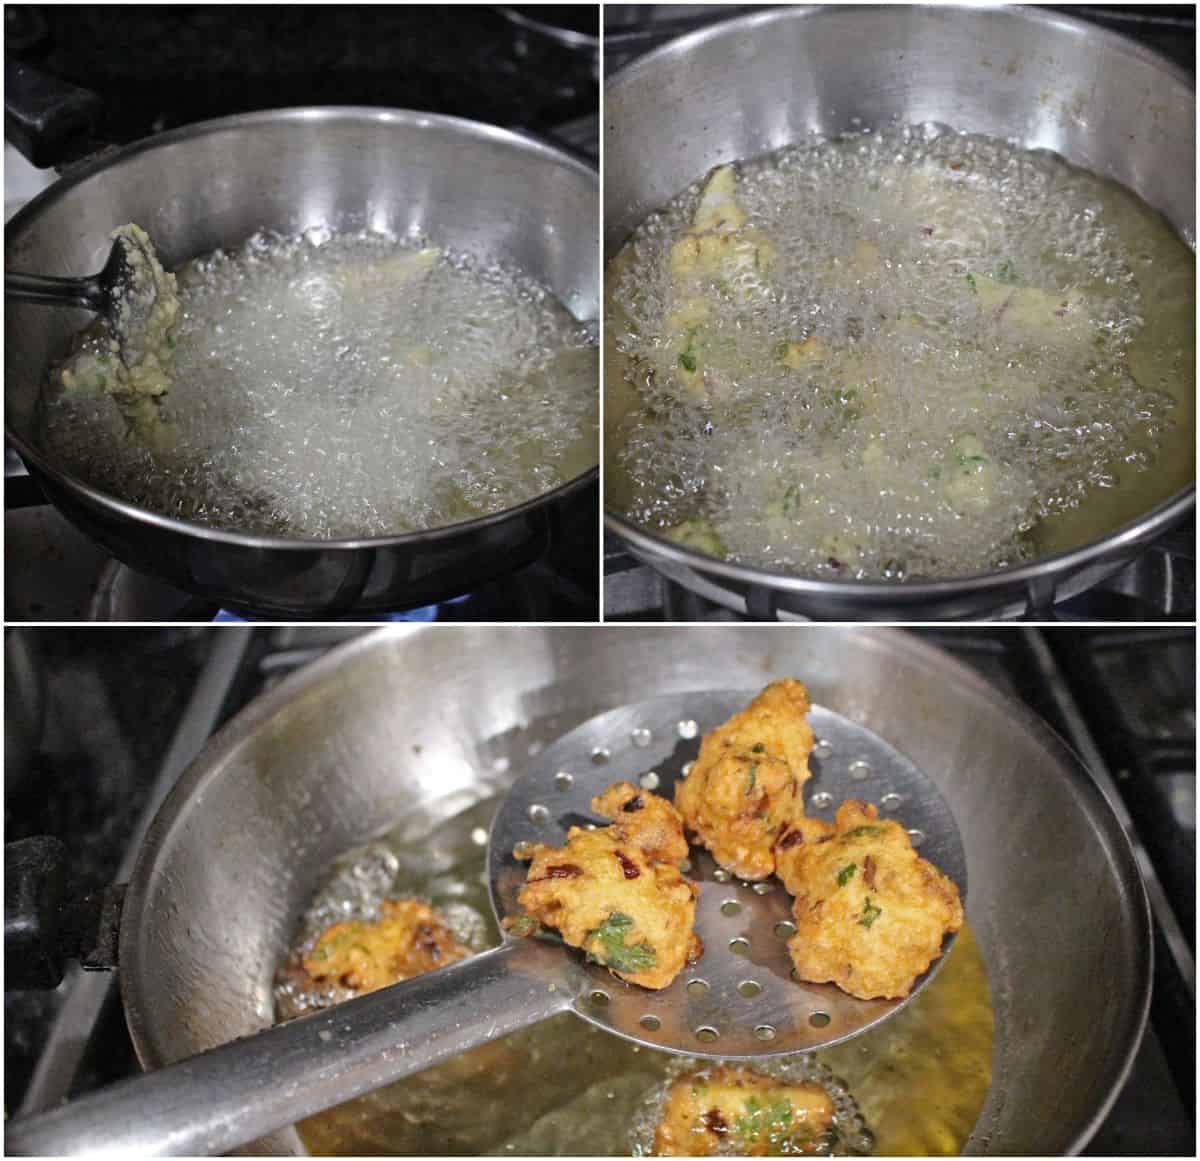 deep frying the fritters in oil